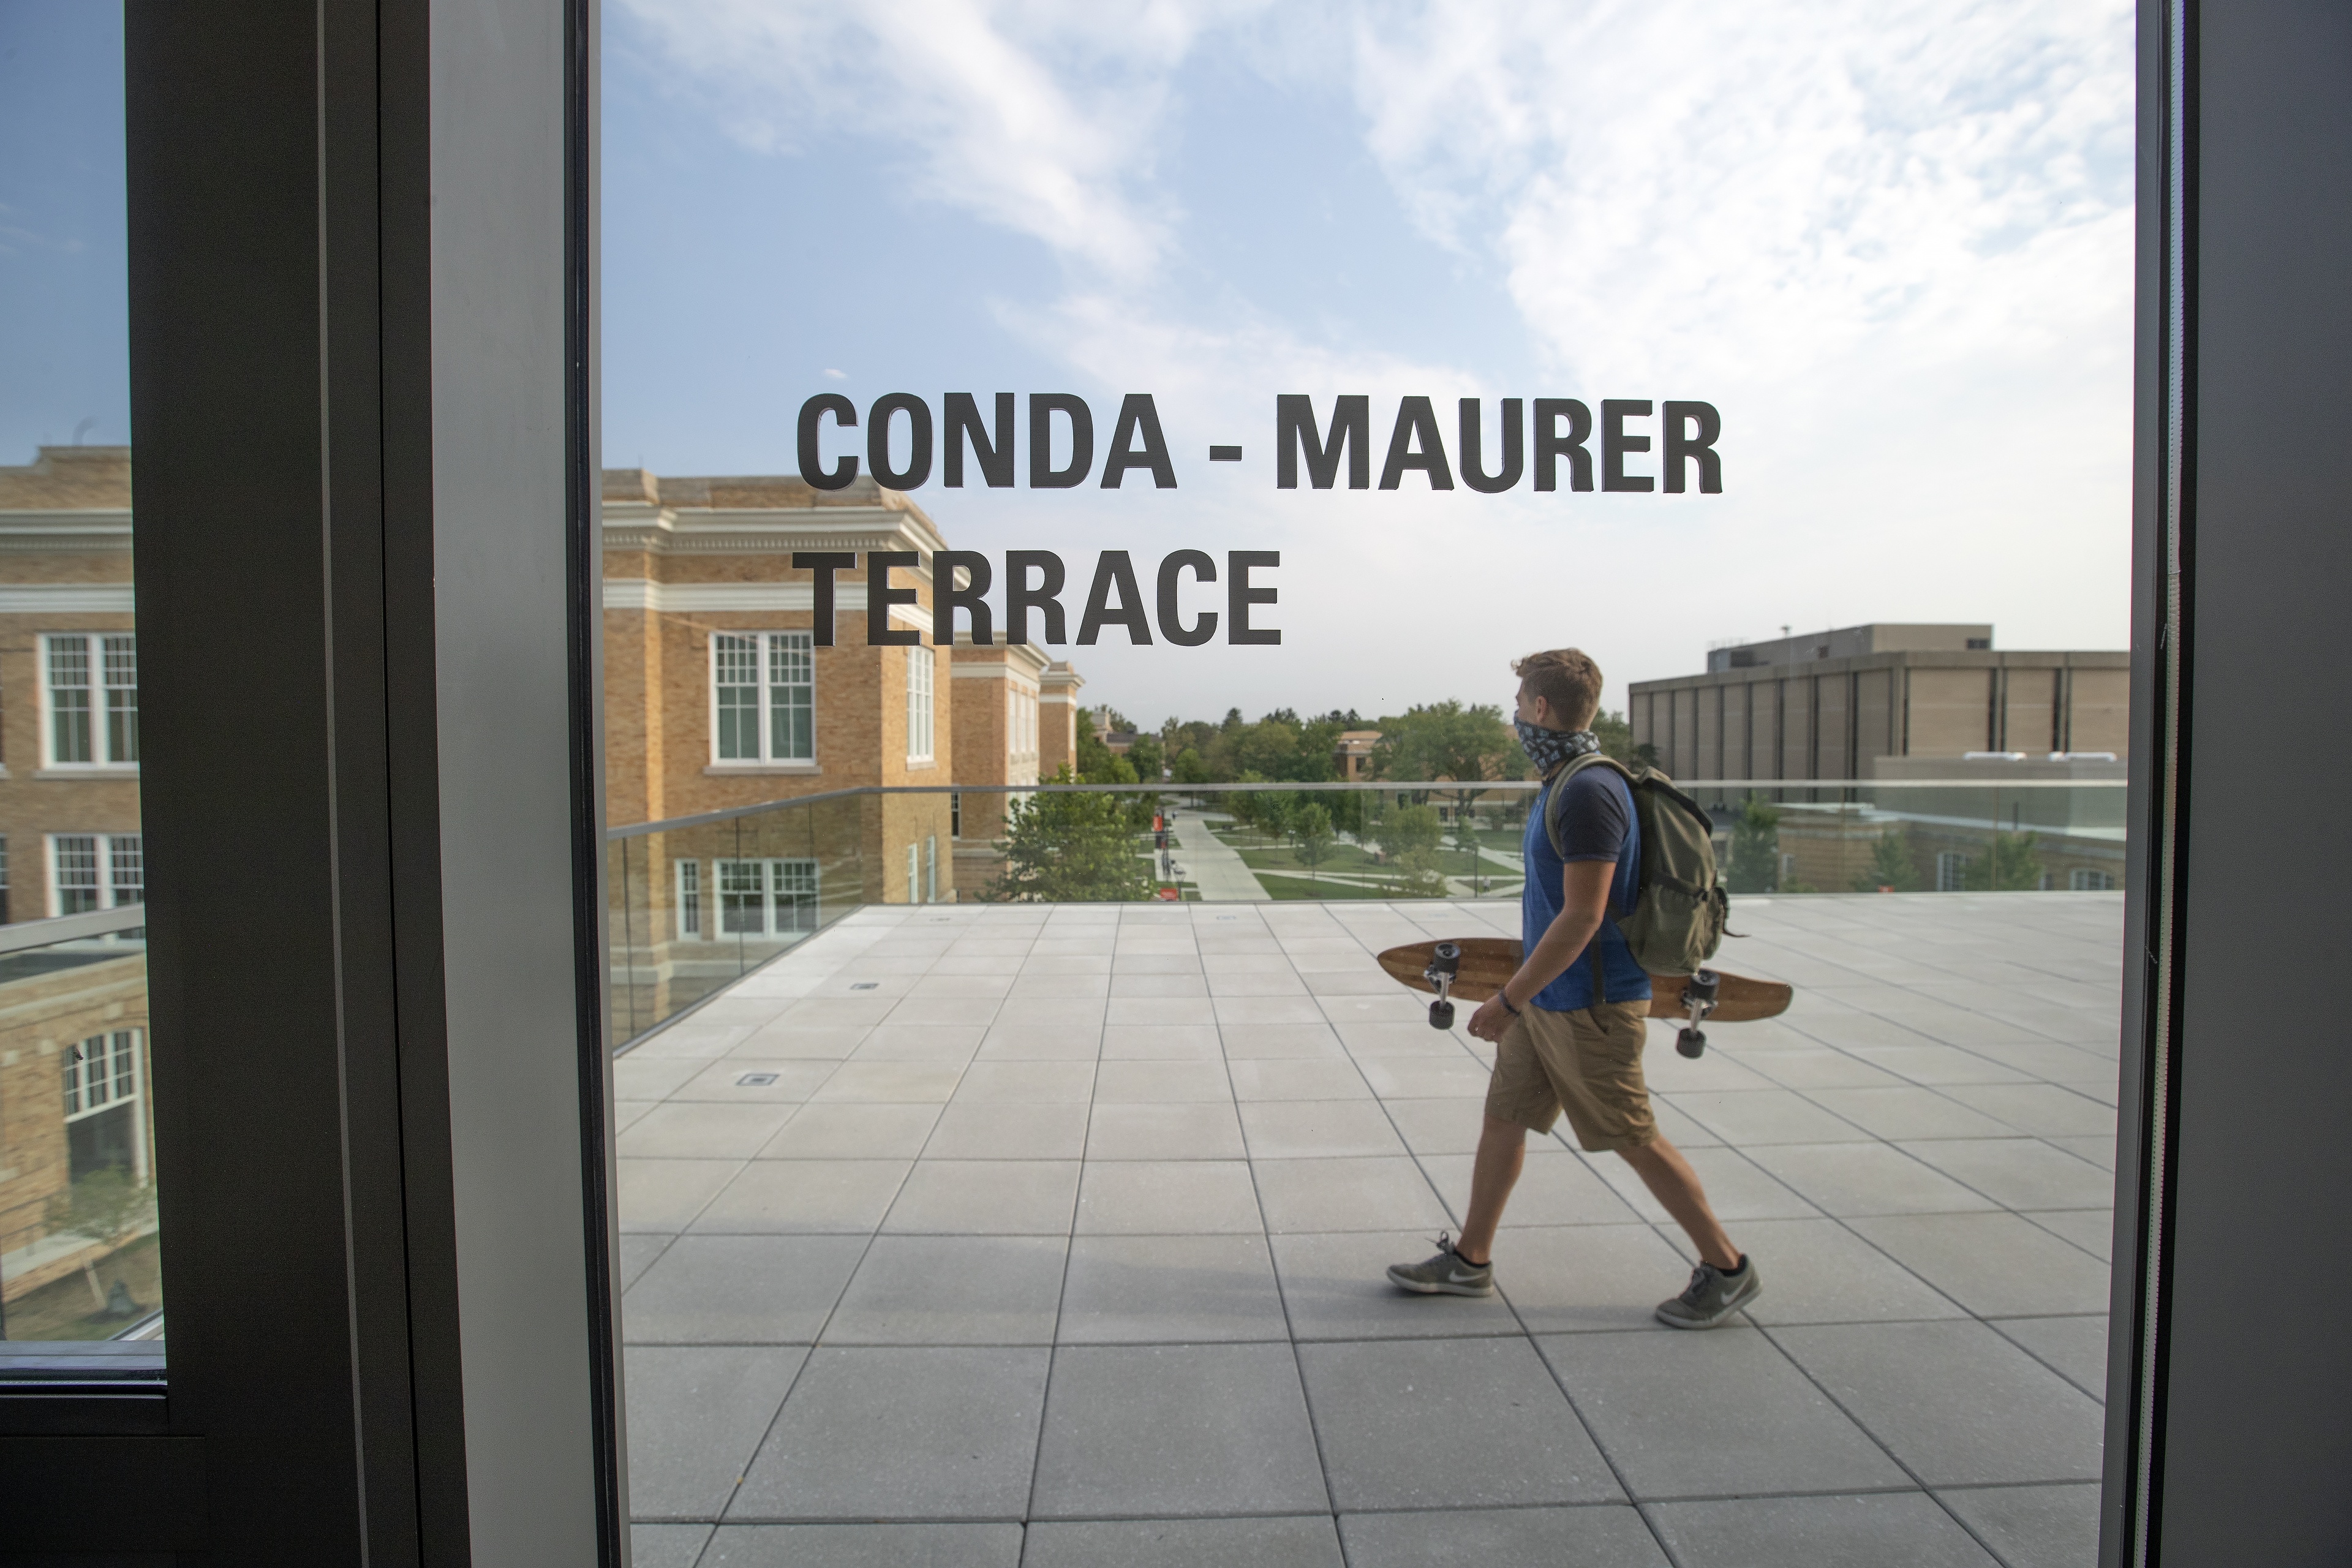 The Conrad-Maurer Terrace at the newly opened Maurer Center